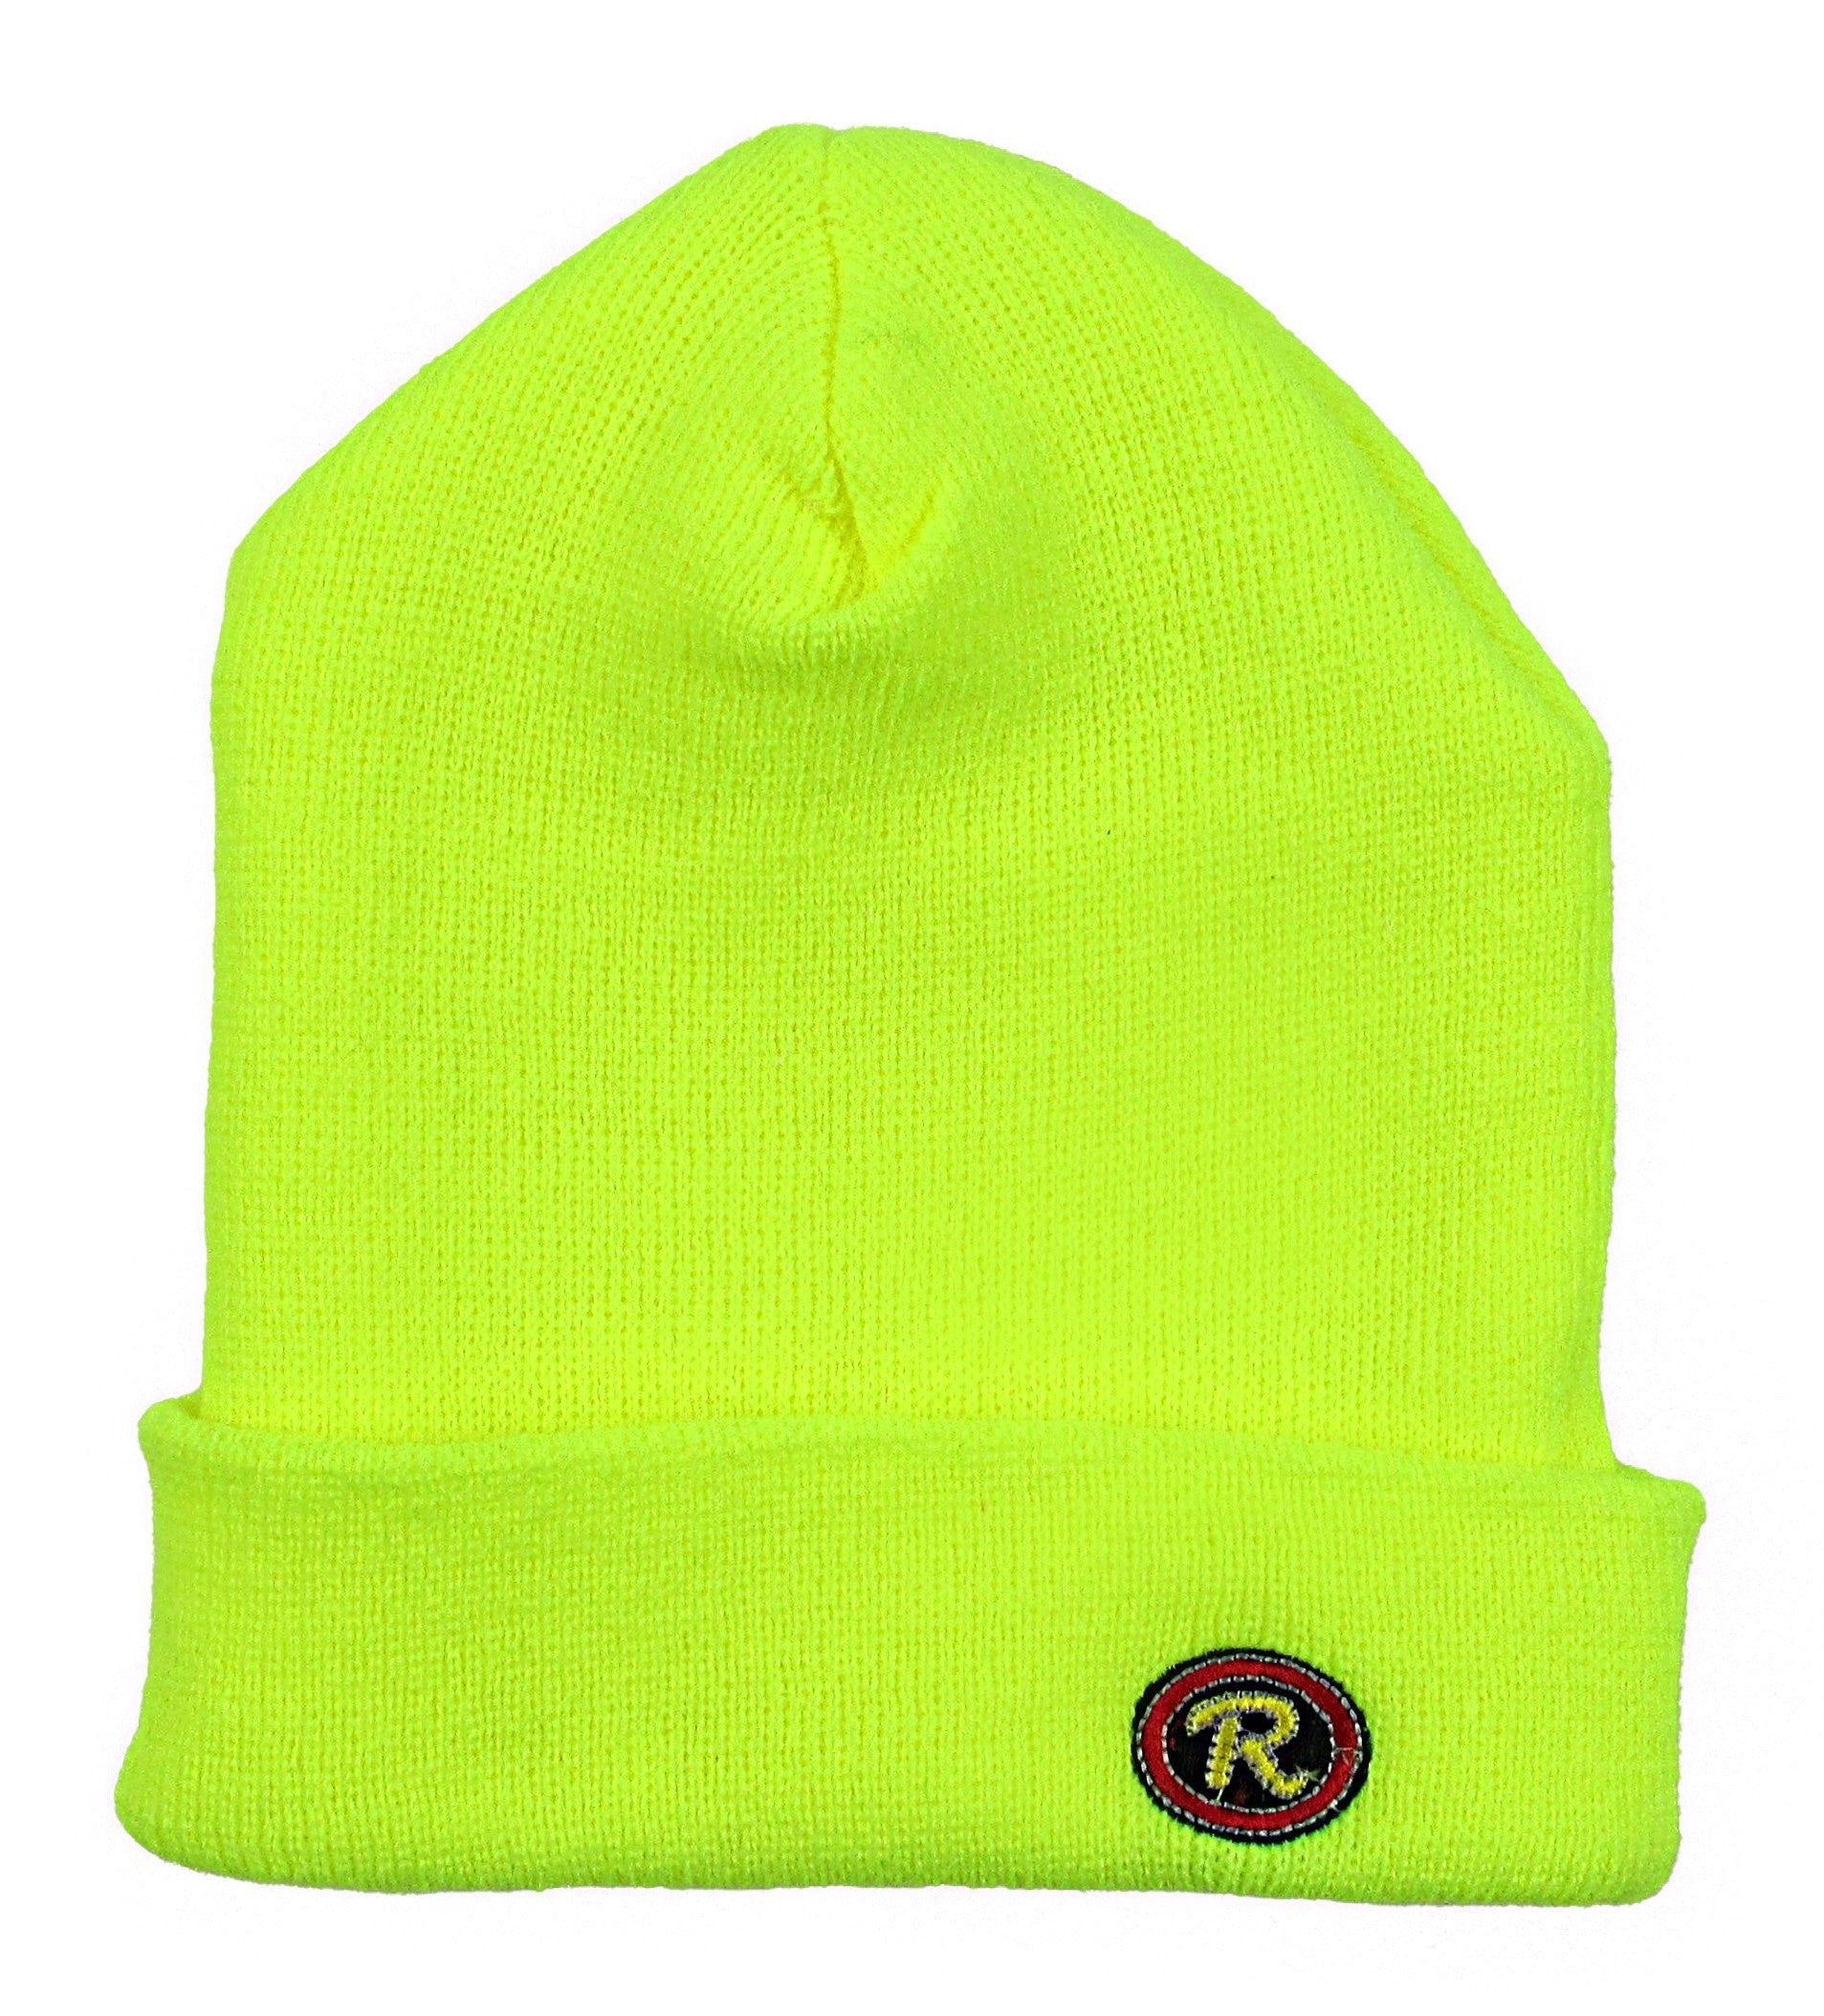 hi visibility yellow beanie with R logo